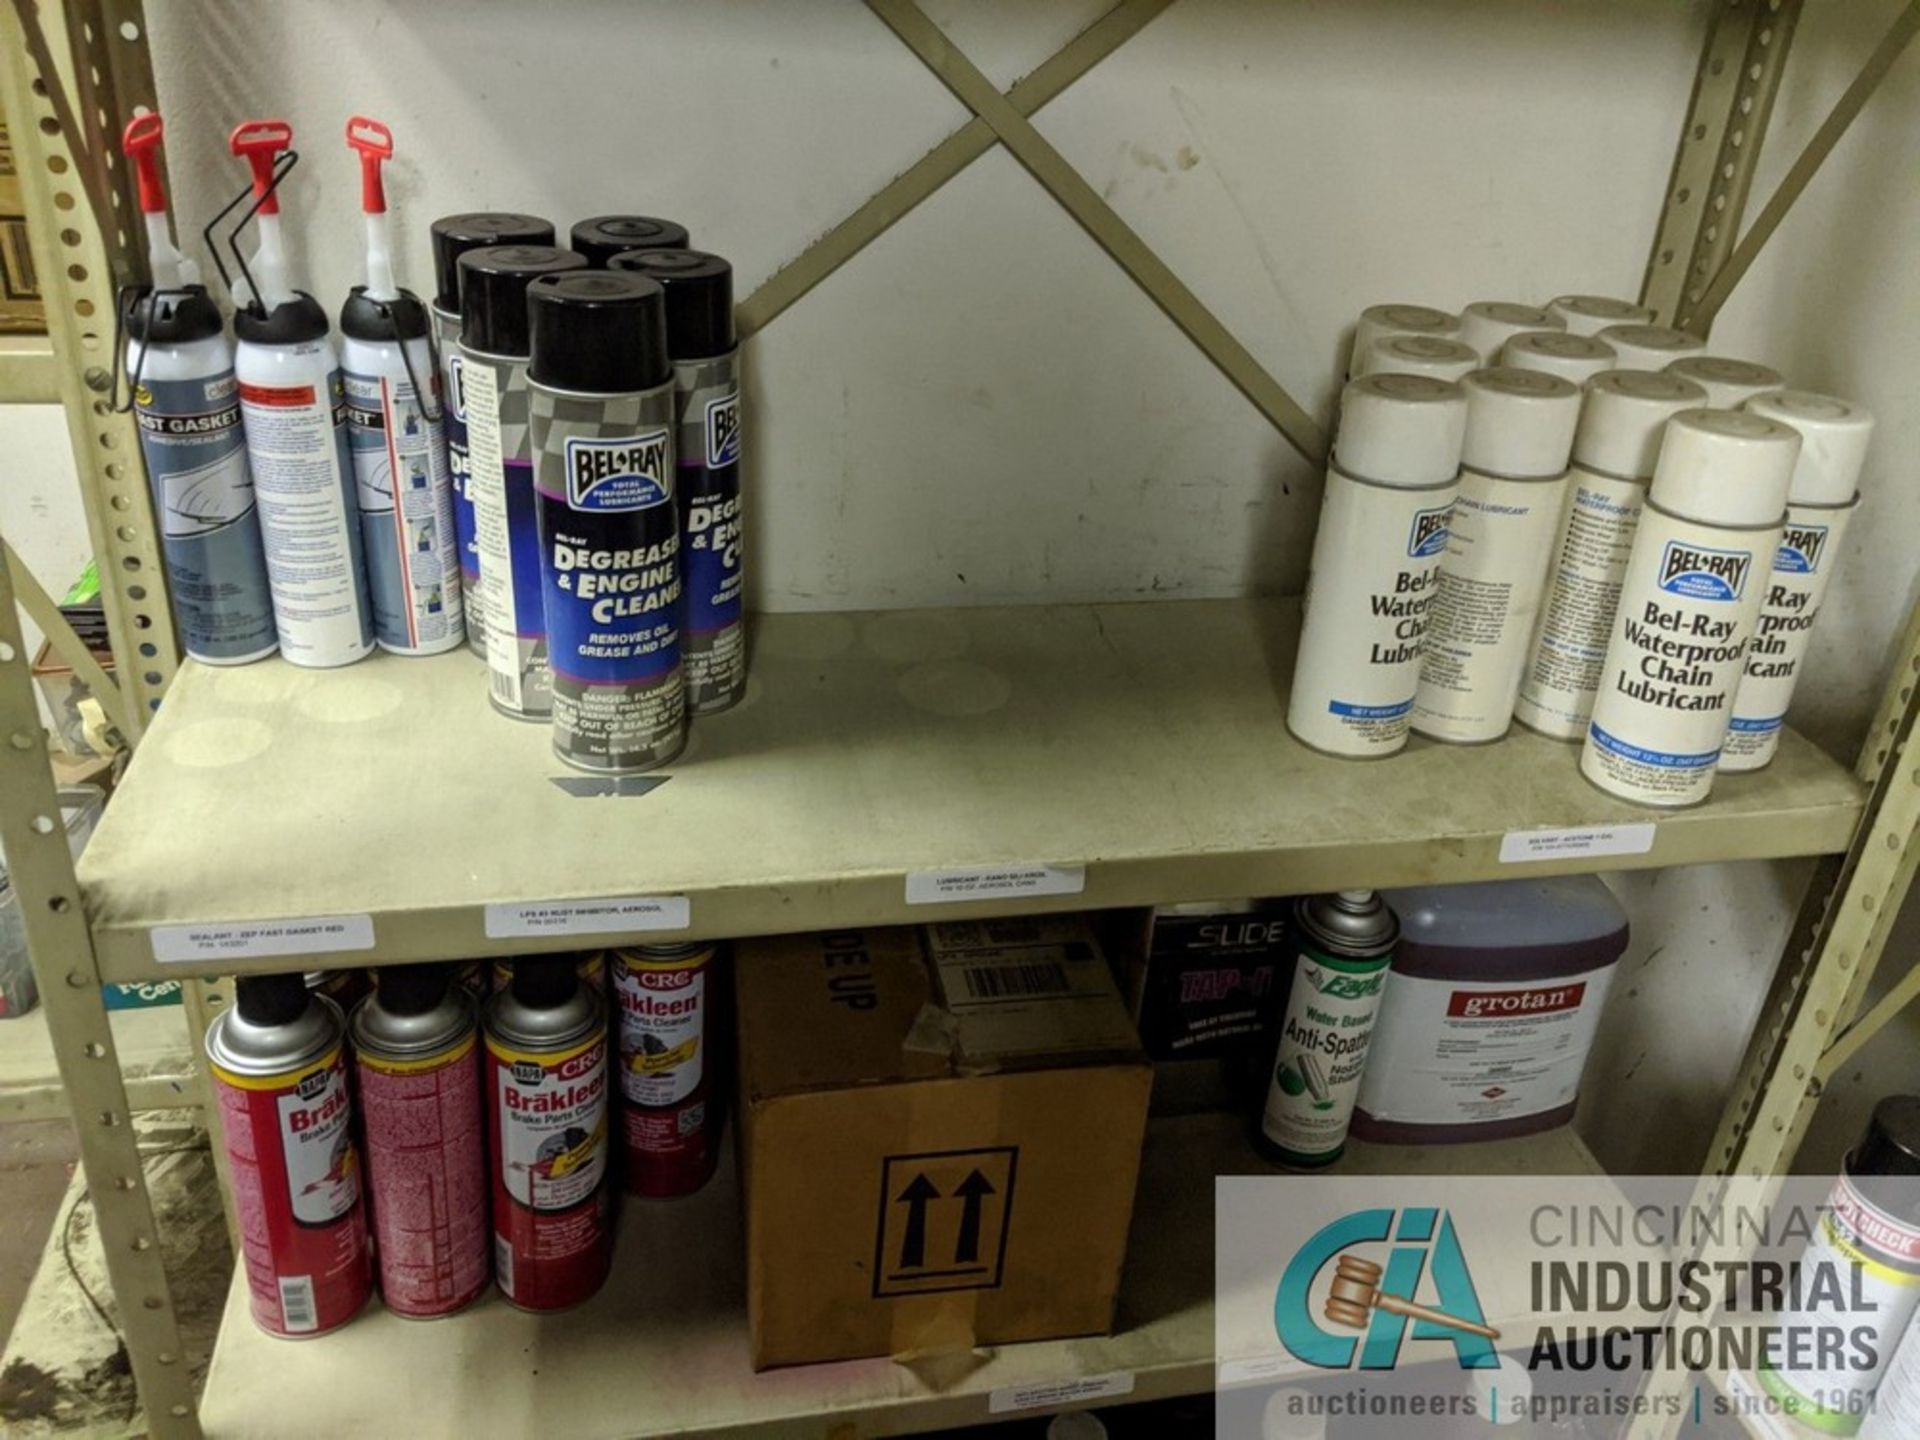 SECTIONS OF SHELVING W/ CONTENTS; GLOVES, DEGREASER, CHAIN LUBRICANT, BRAKE CLEANER, HARDWARE & - Image 4 of 7